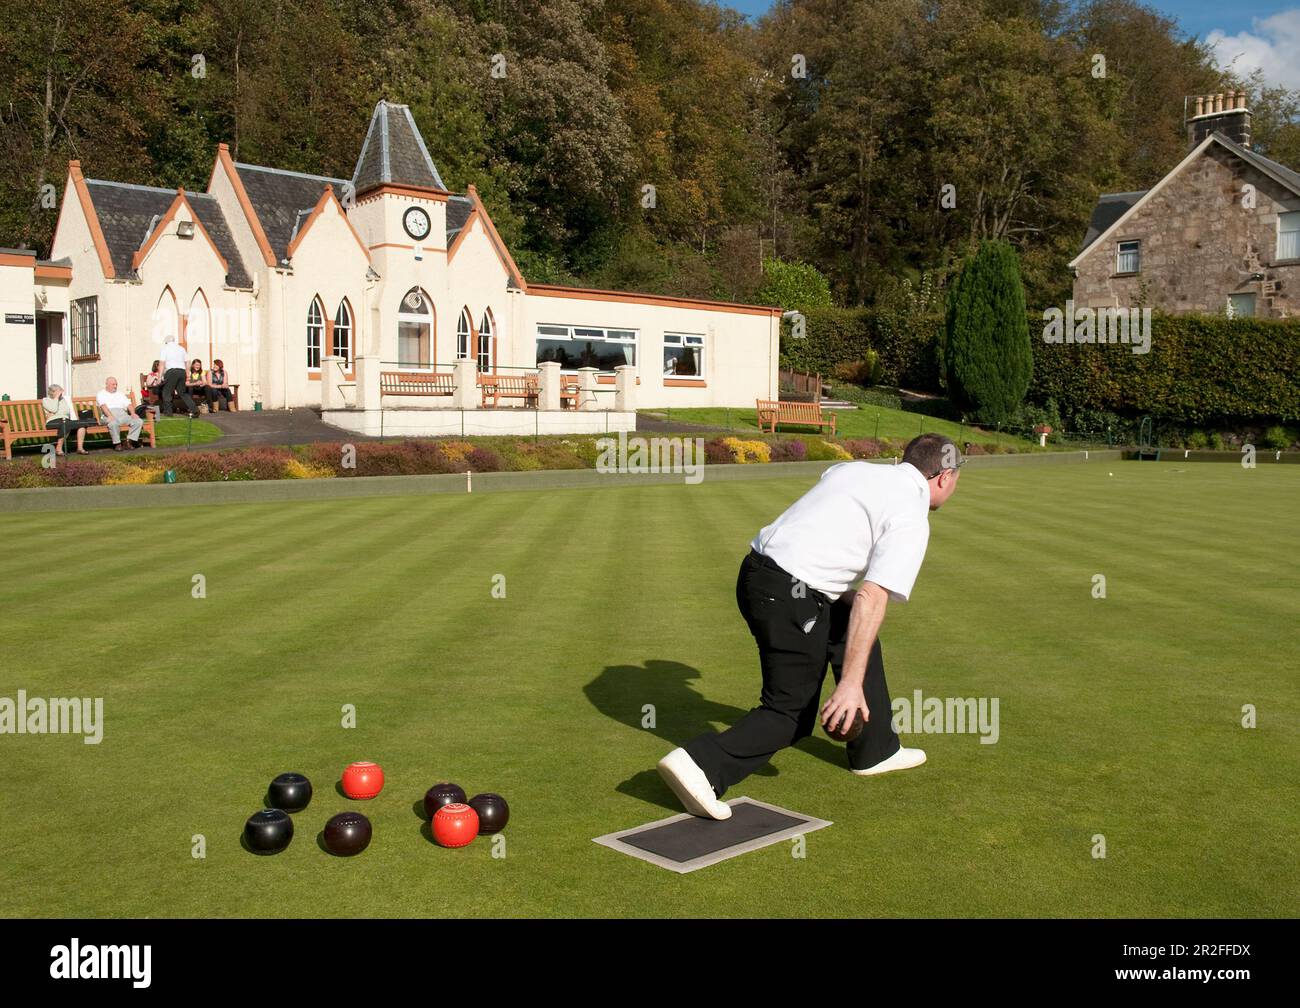 Bowls in play in front of the pavilion of the Stirling lawn bowling club green in Stirling, Scotland, UK Stock Photo